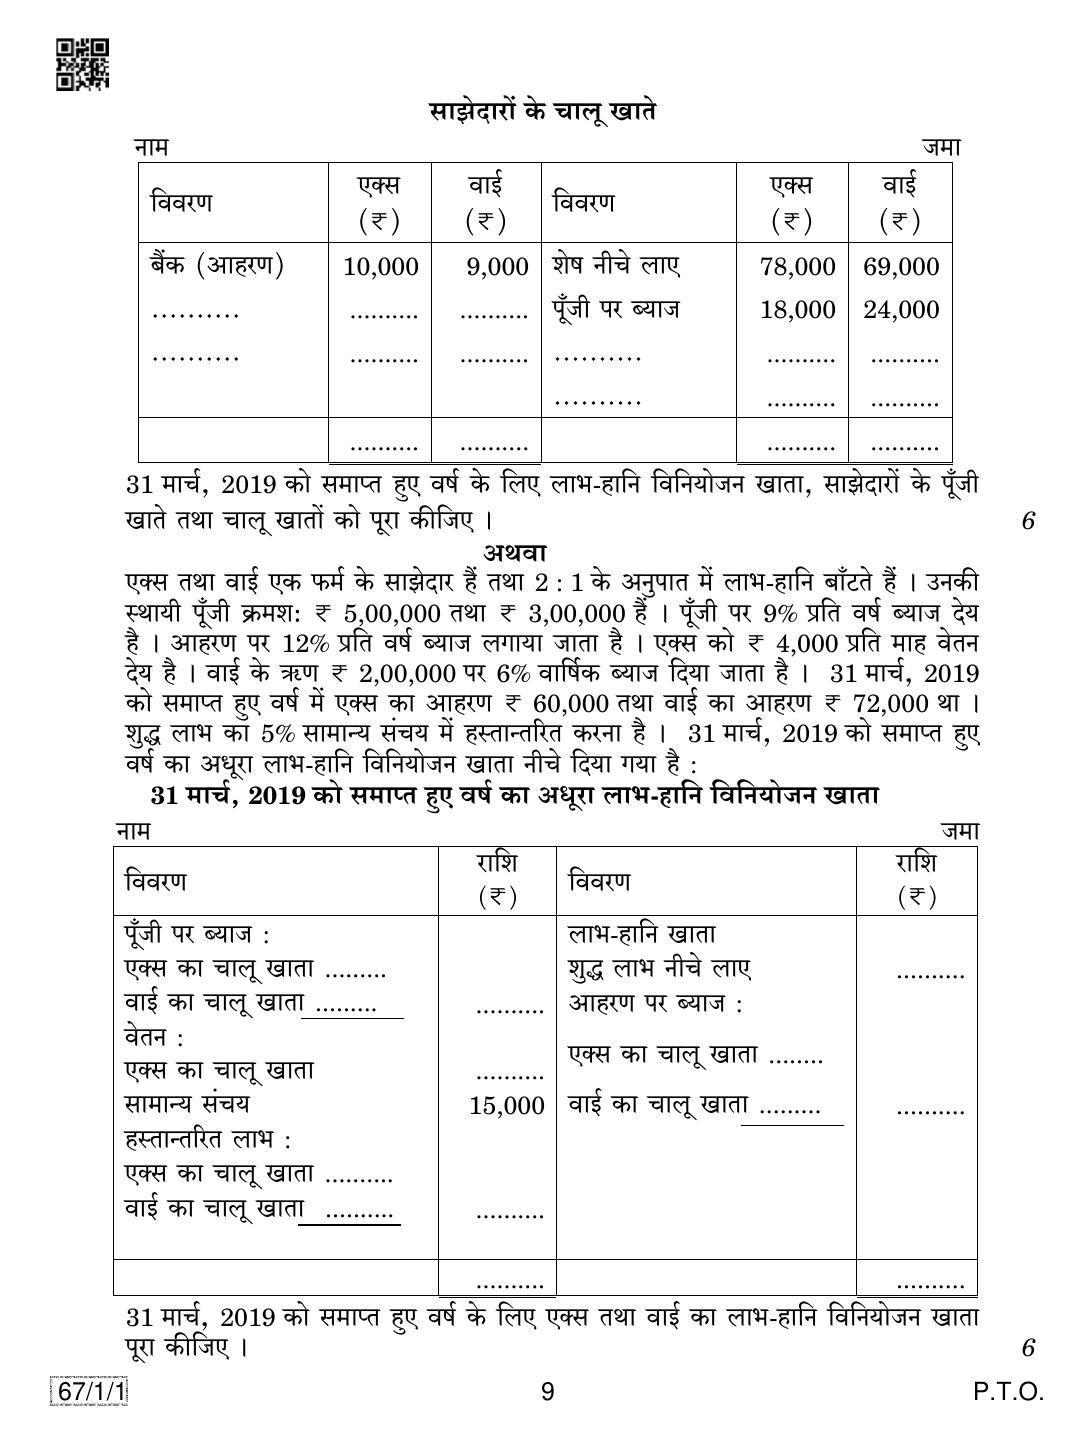 CBSE Class 12 67-1-1 ACCOUNTANCY 2019 Compartment Question Paper - Page 9